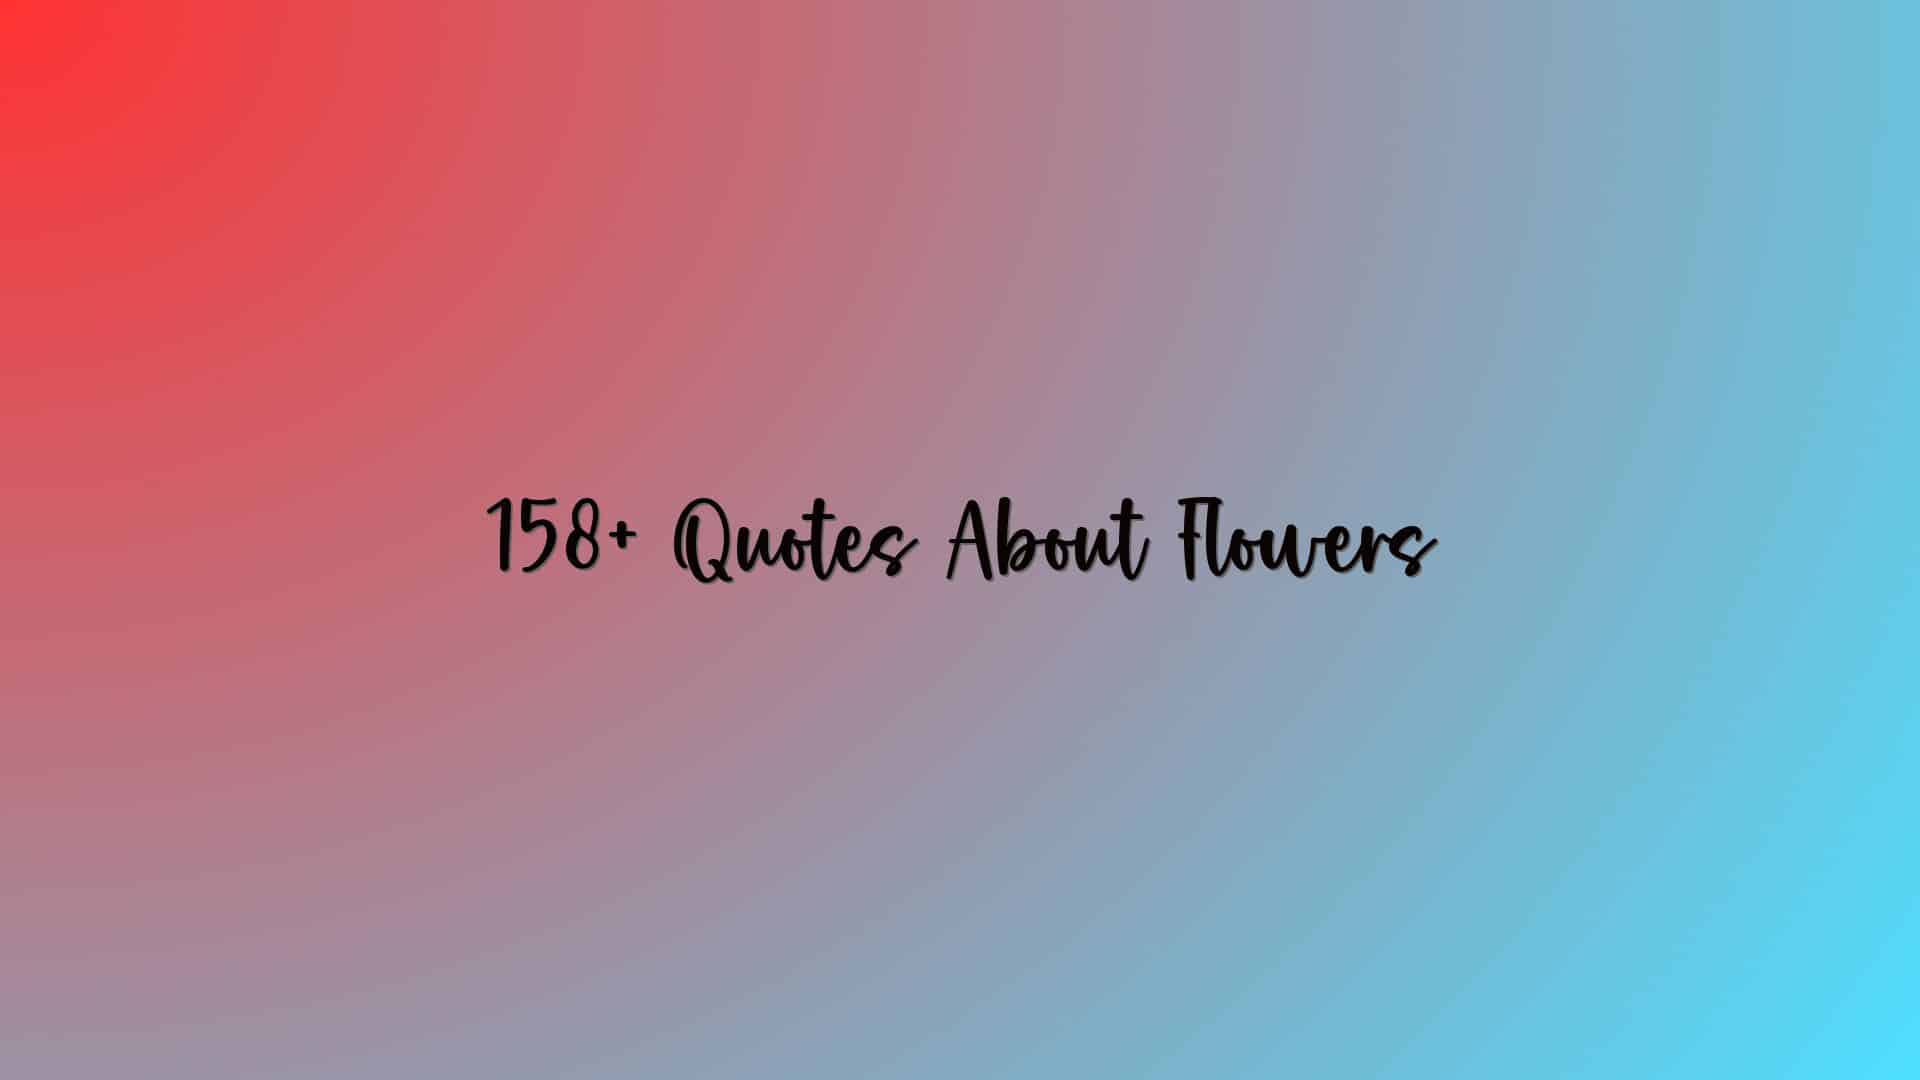 158+ Quotes About Flowers